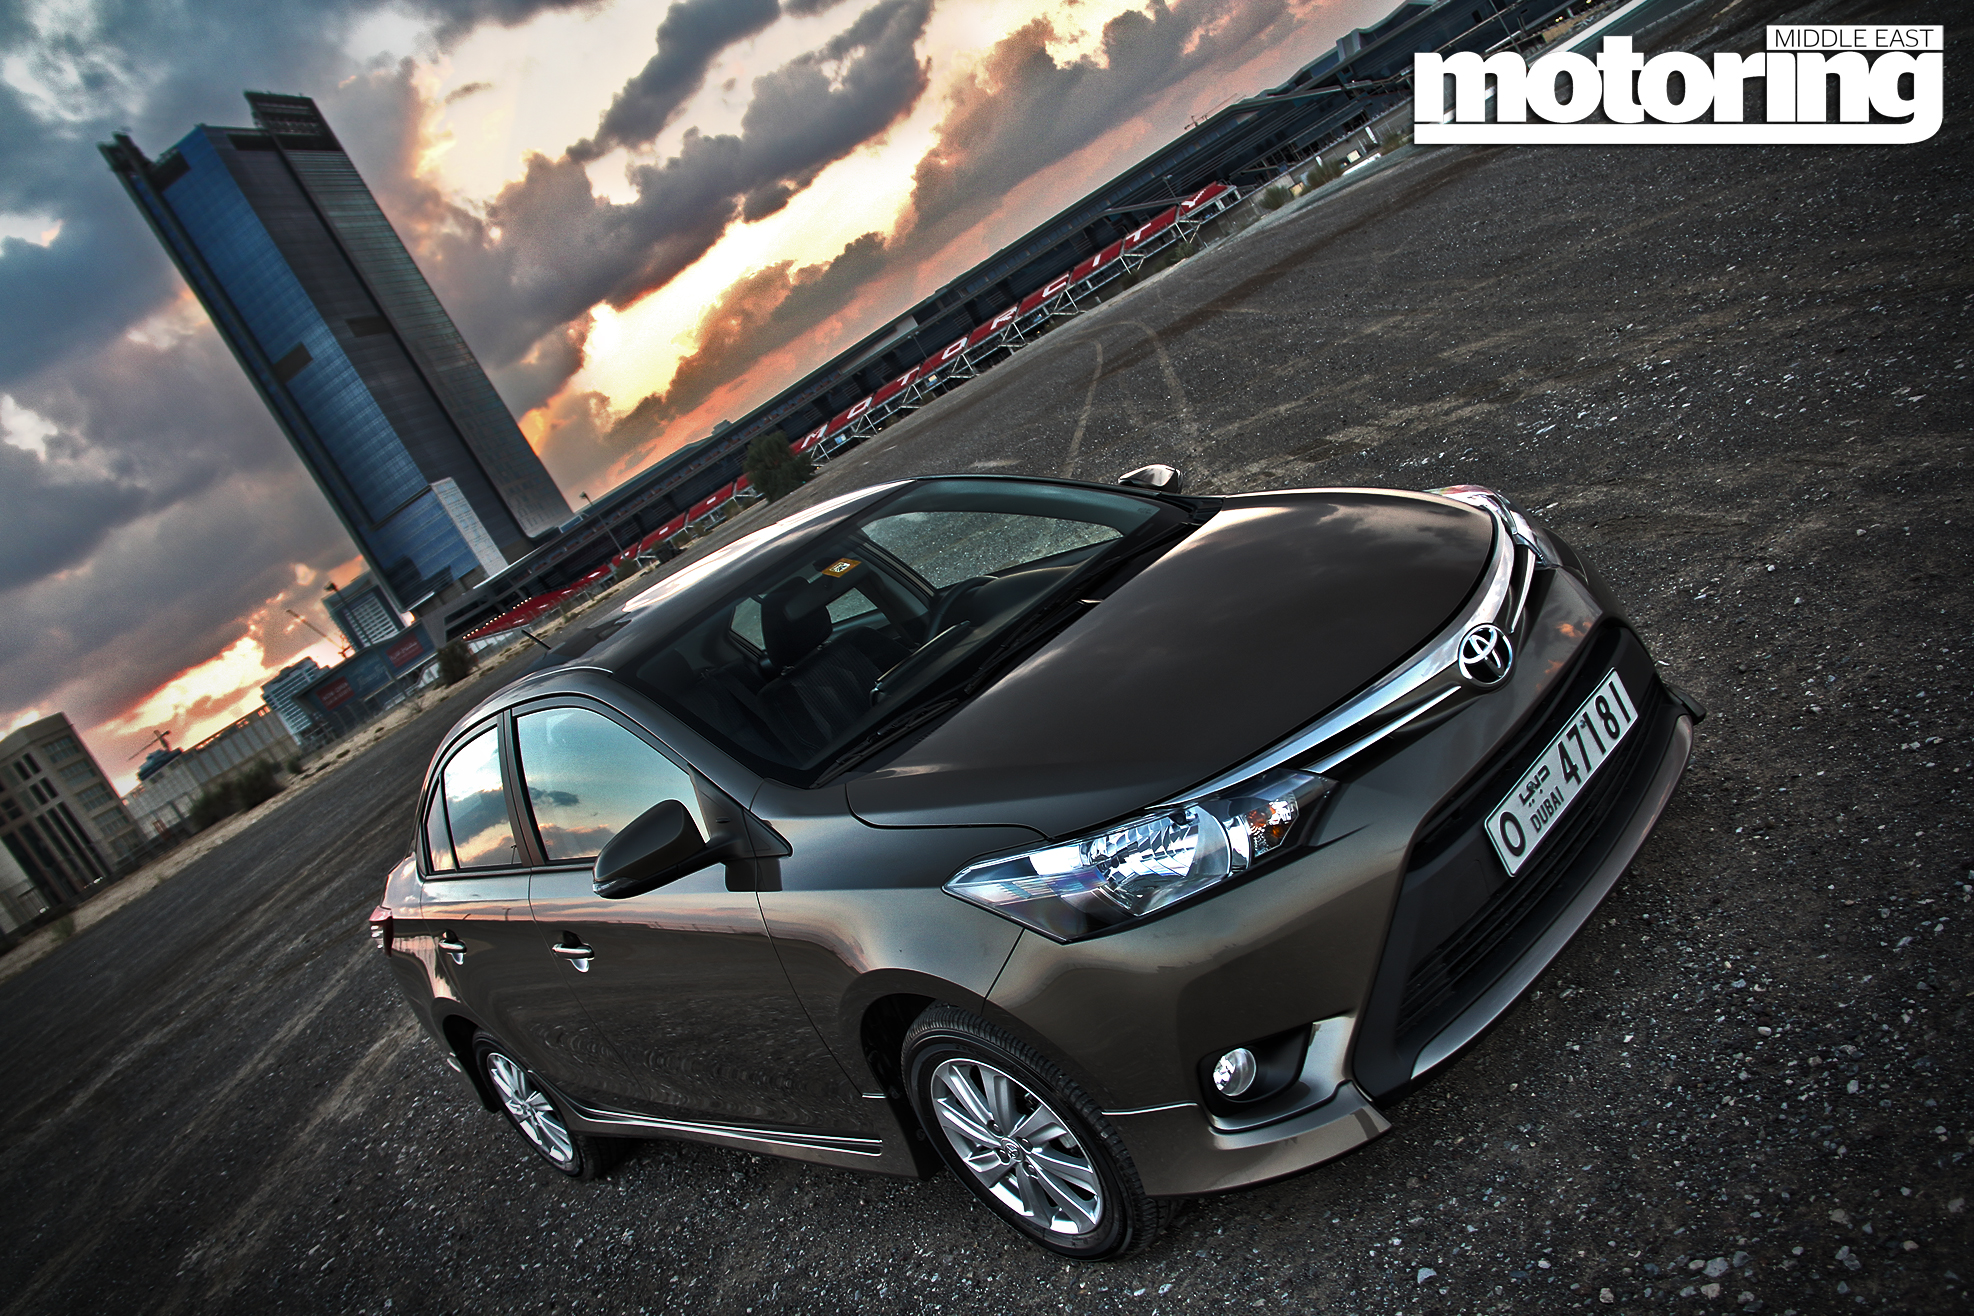 2013 Toyota Yaris saloon review - Motoring Middle East: Car news, Reviews  and Buying guidesMotoring Middle East: Car news, Reviews and Buying guides